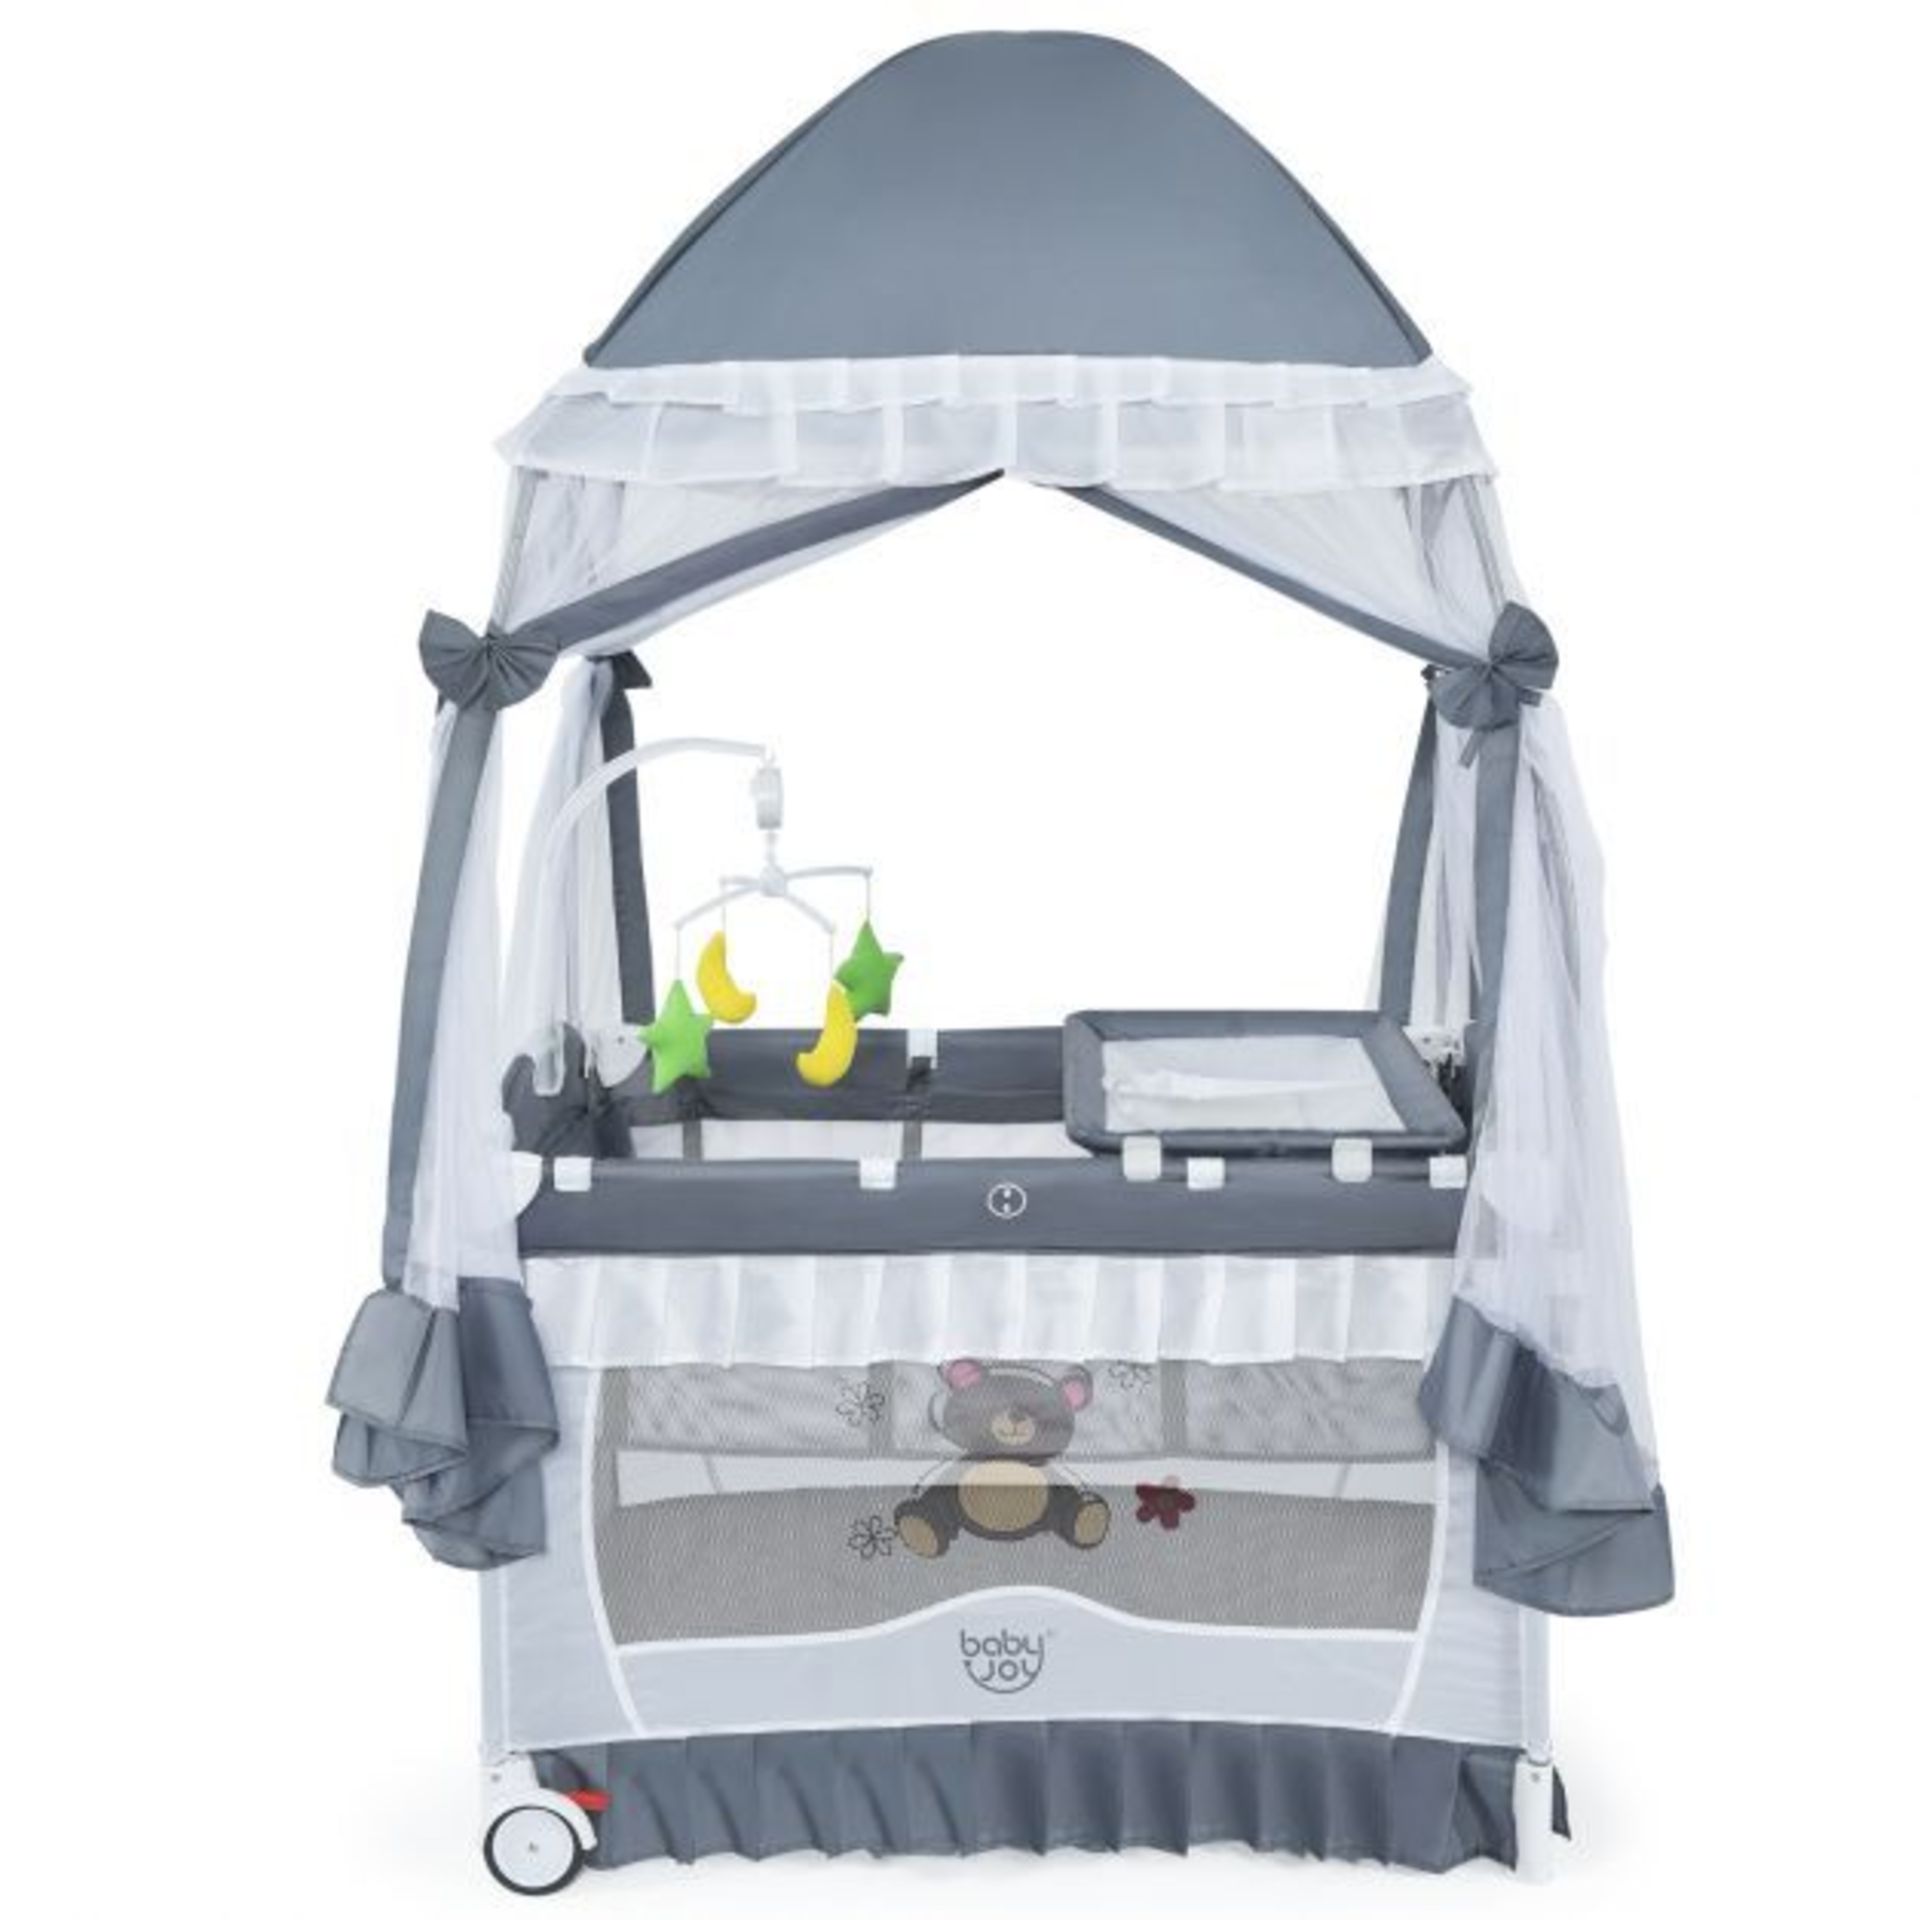 4 in 1 Convertible Baby Bed with Detachable Canopy and Changing Table. - ER53. The foldable design